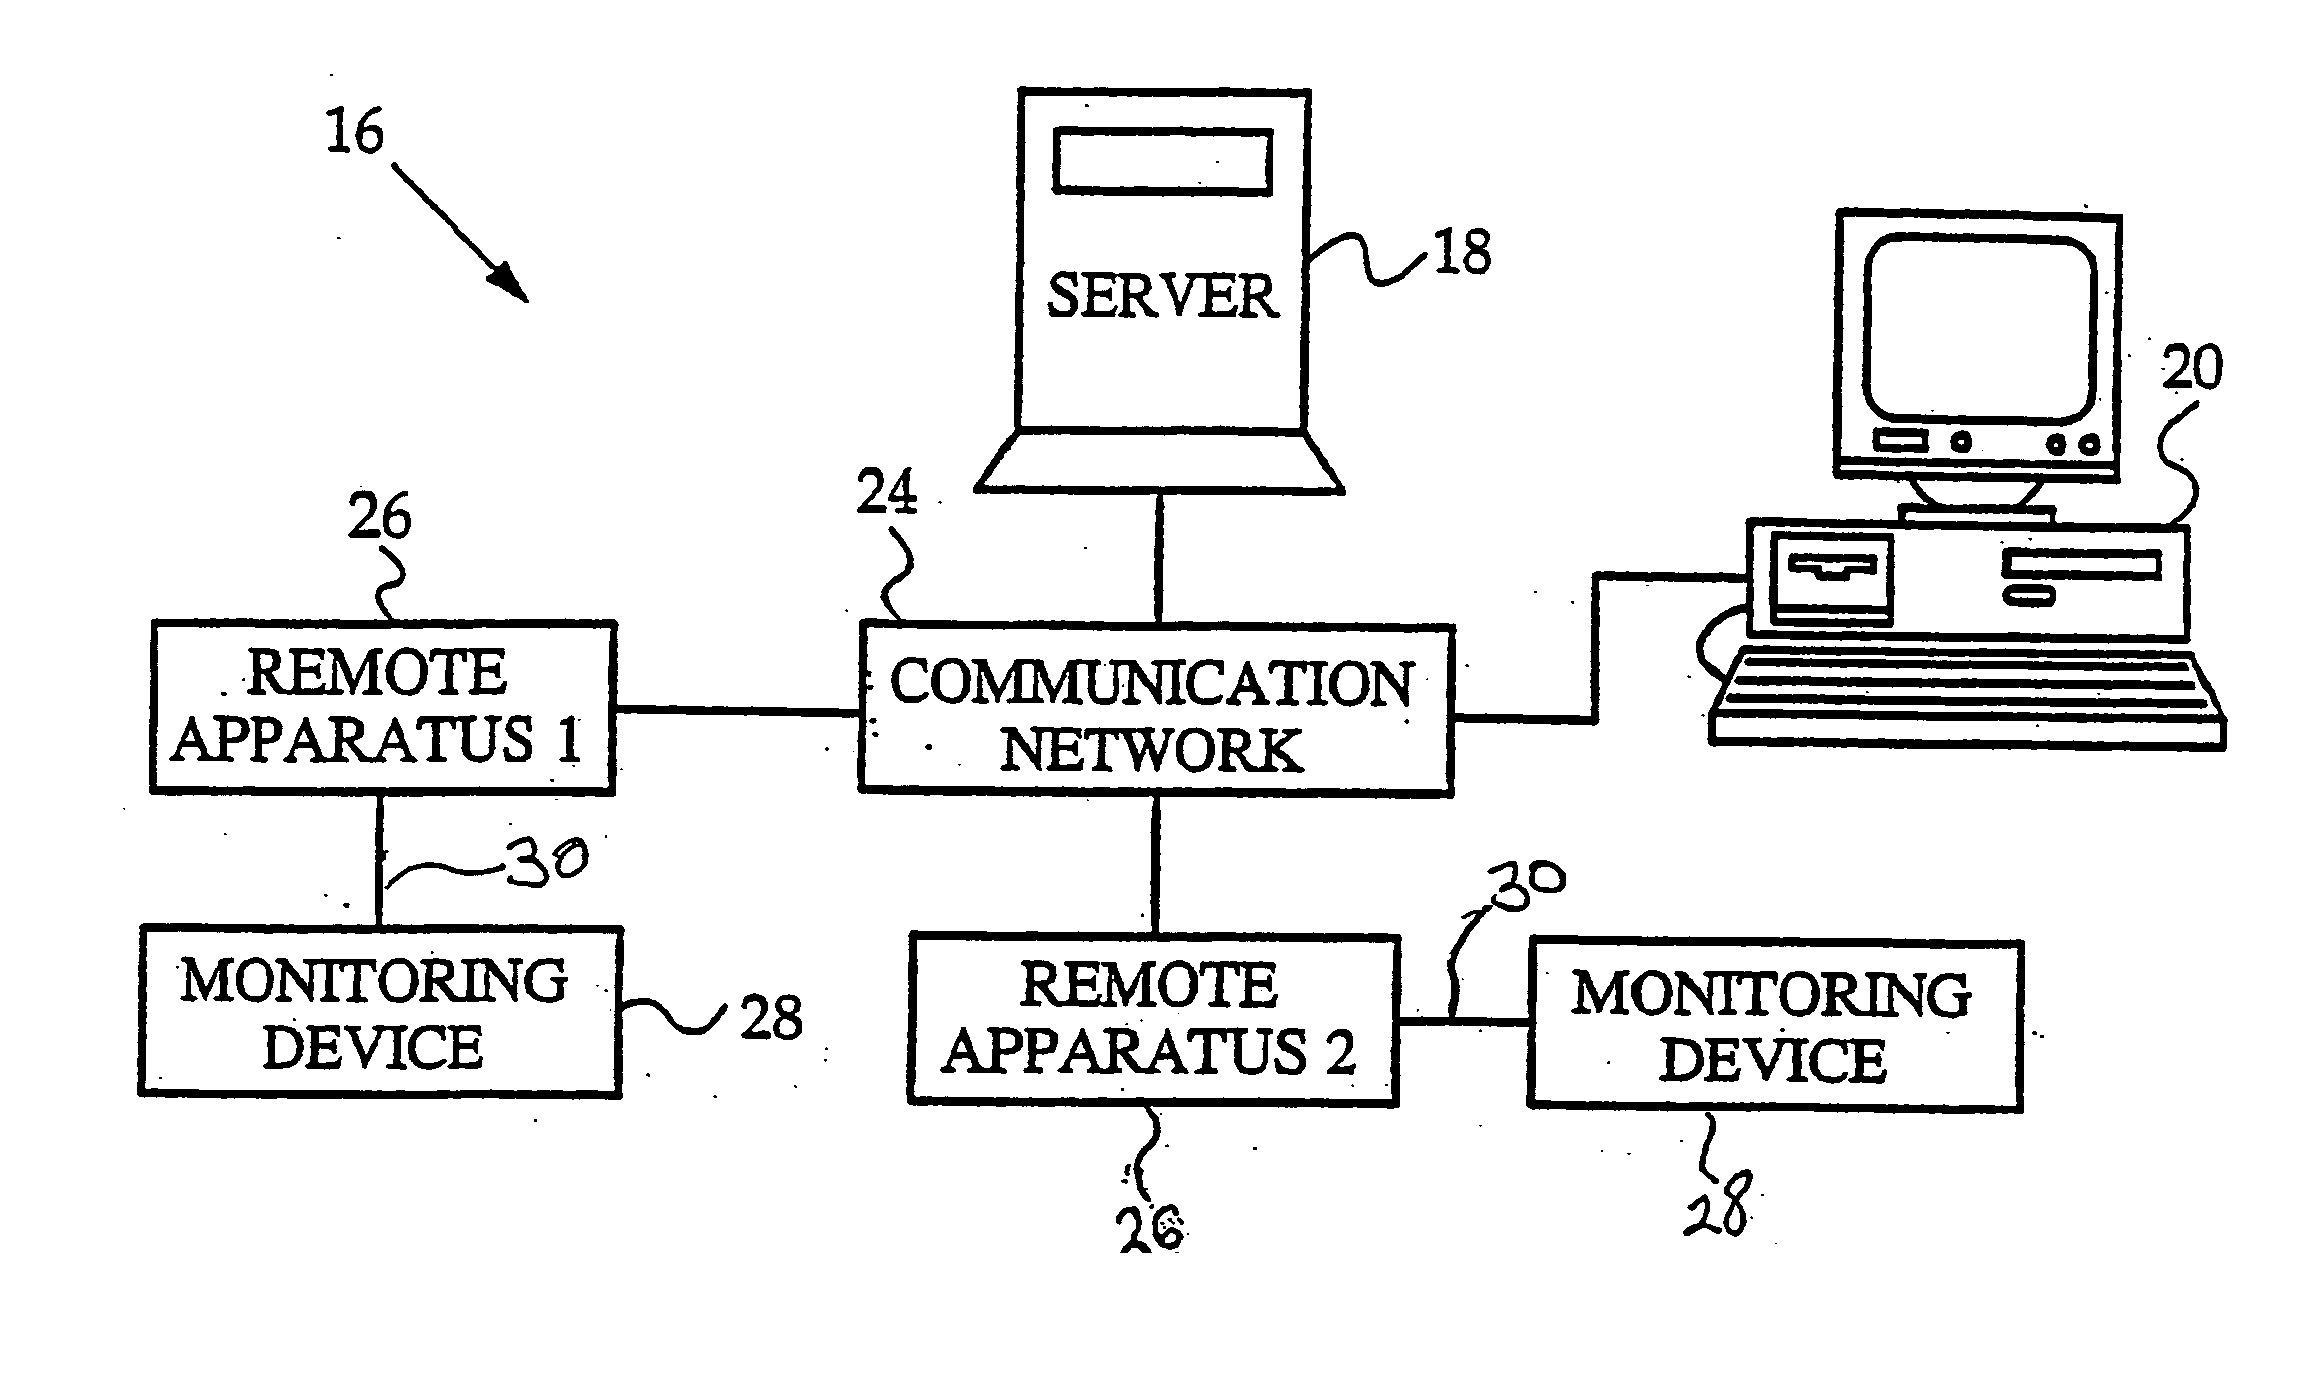 Networked system for interactive communication and remote monitoring of individuals